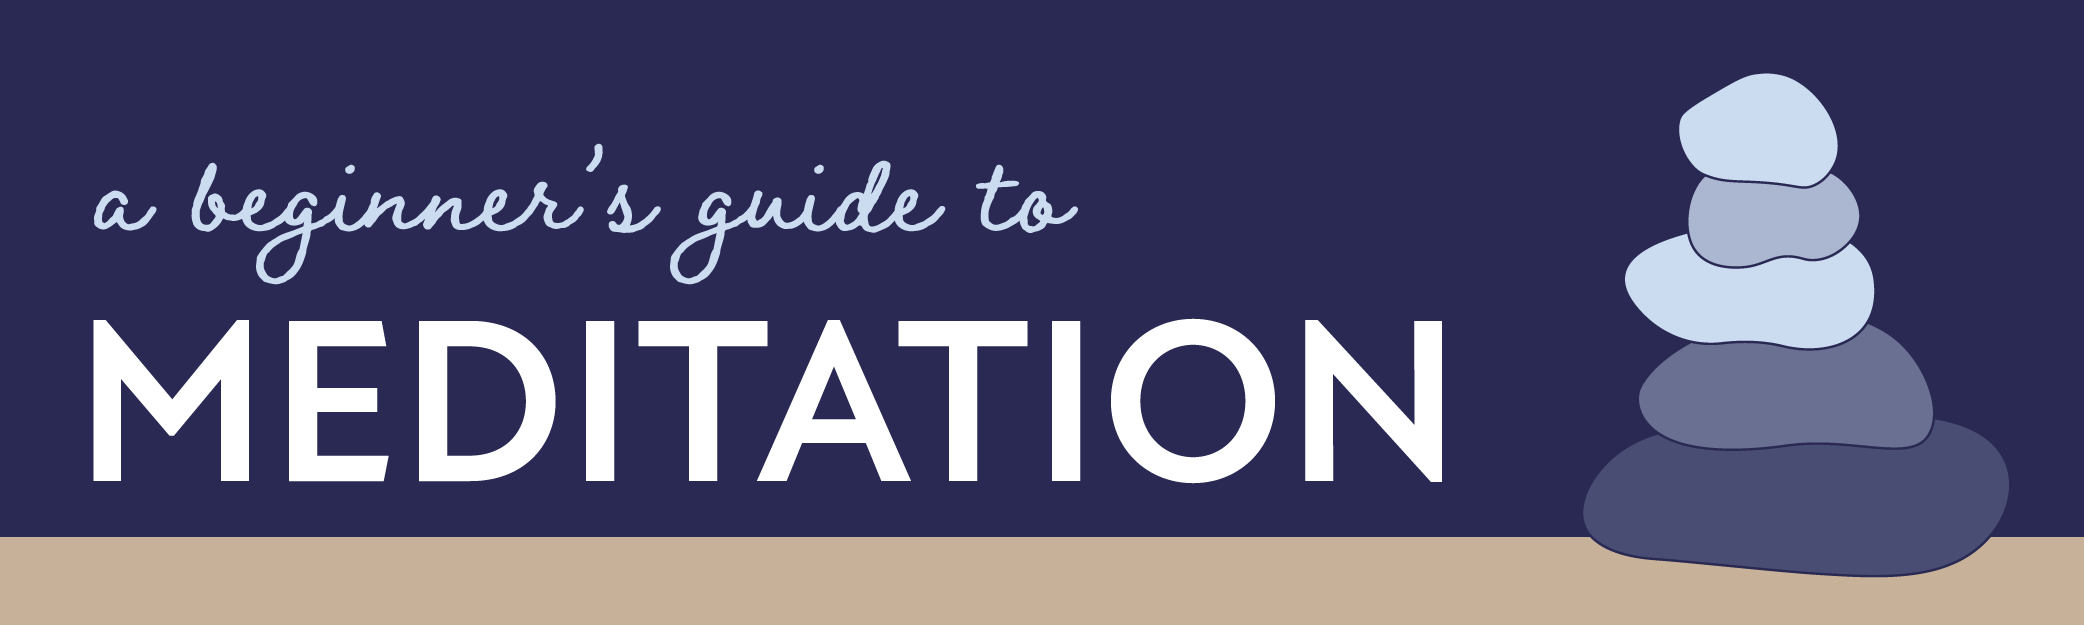 A Beginner's Guide to Meditation Infographic Header